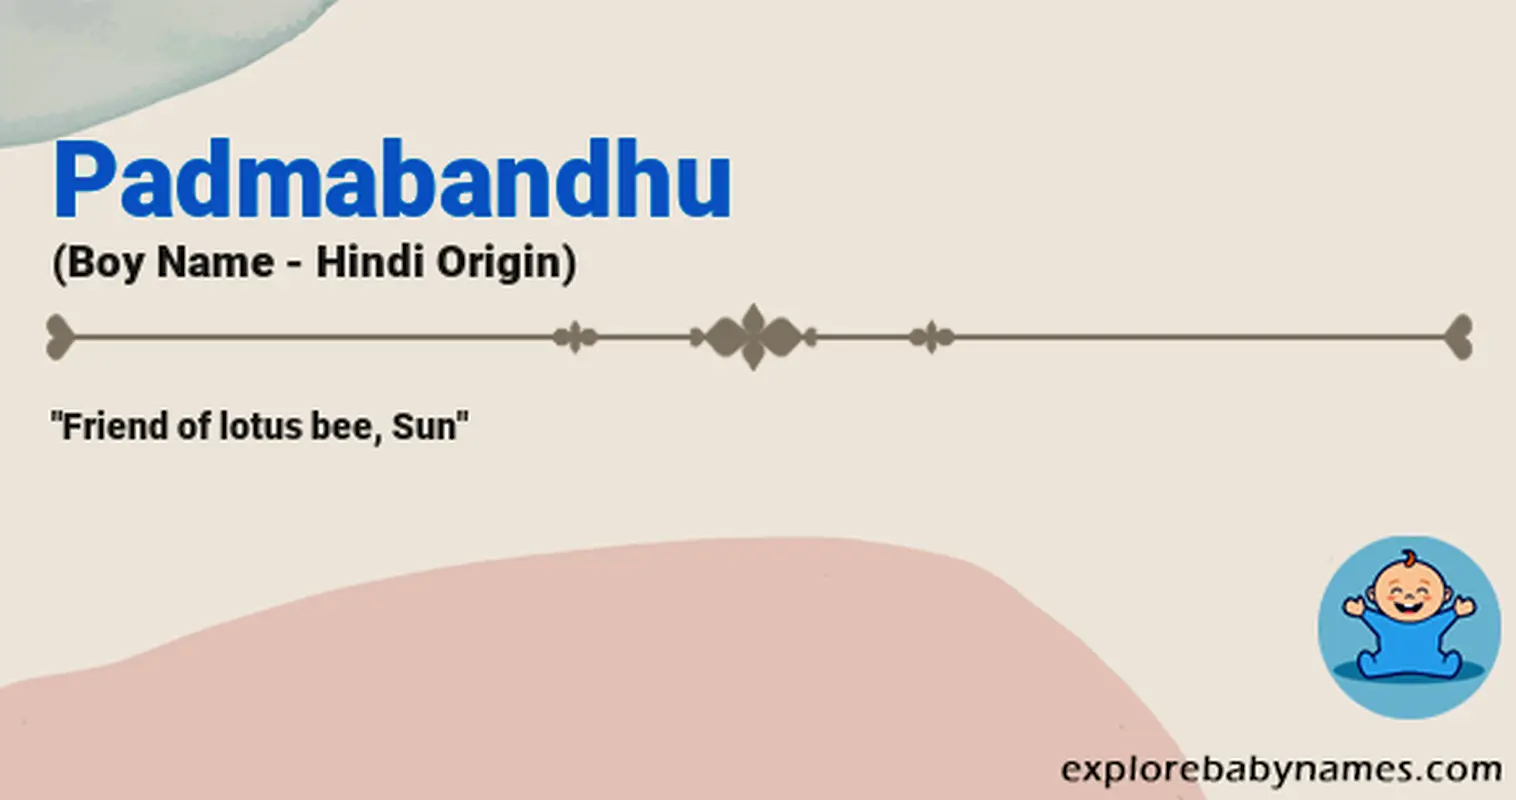 Meaning of Padmabandhu